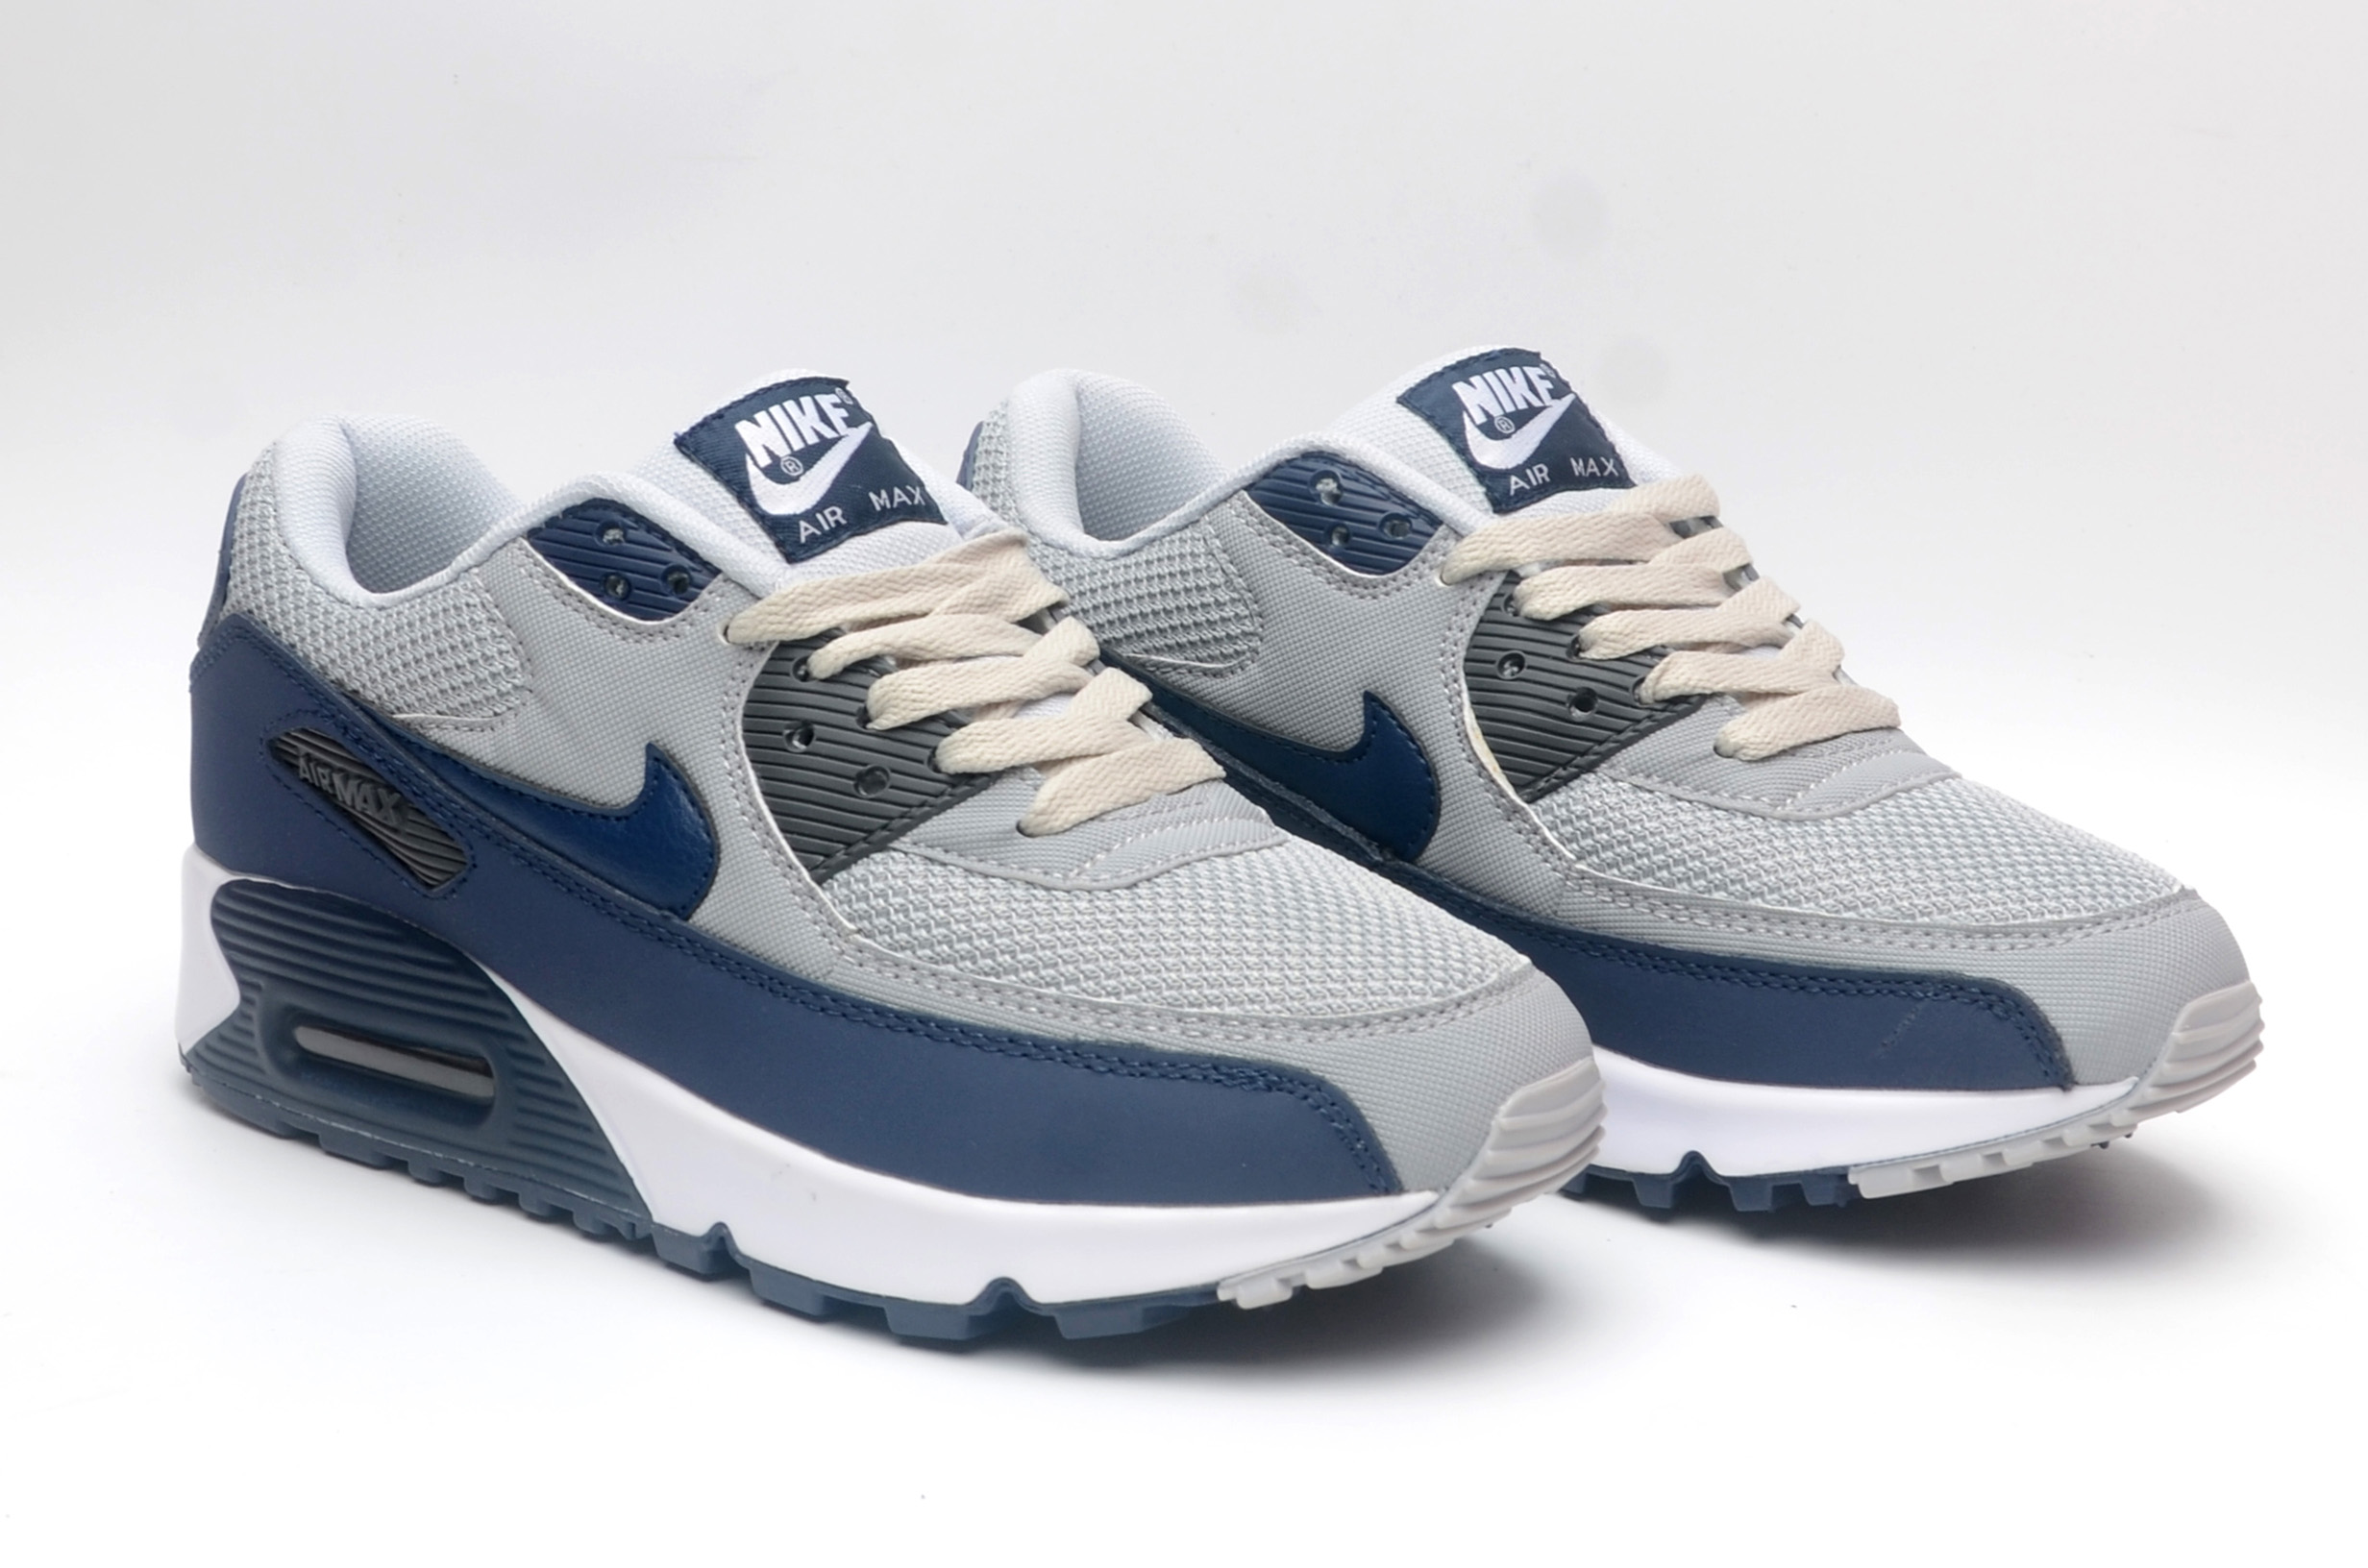 Women's Running weapon Air Max 90 Shoes 029